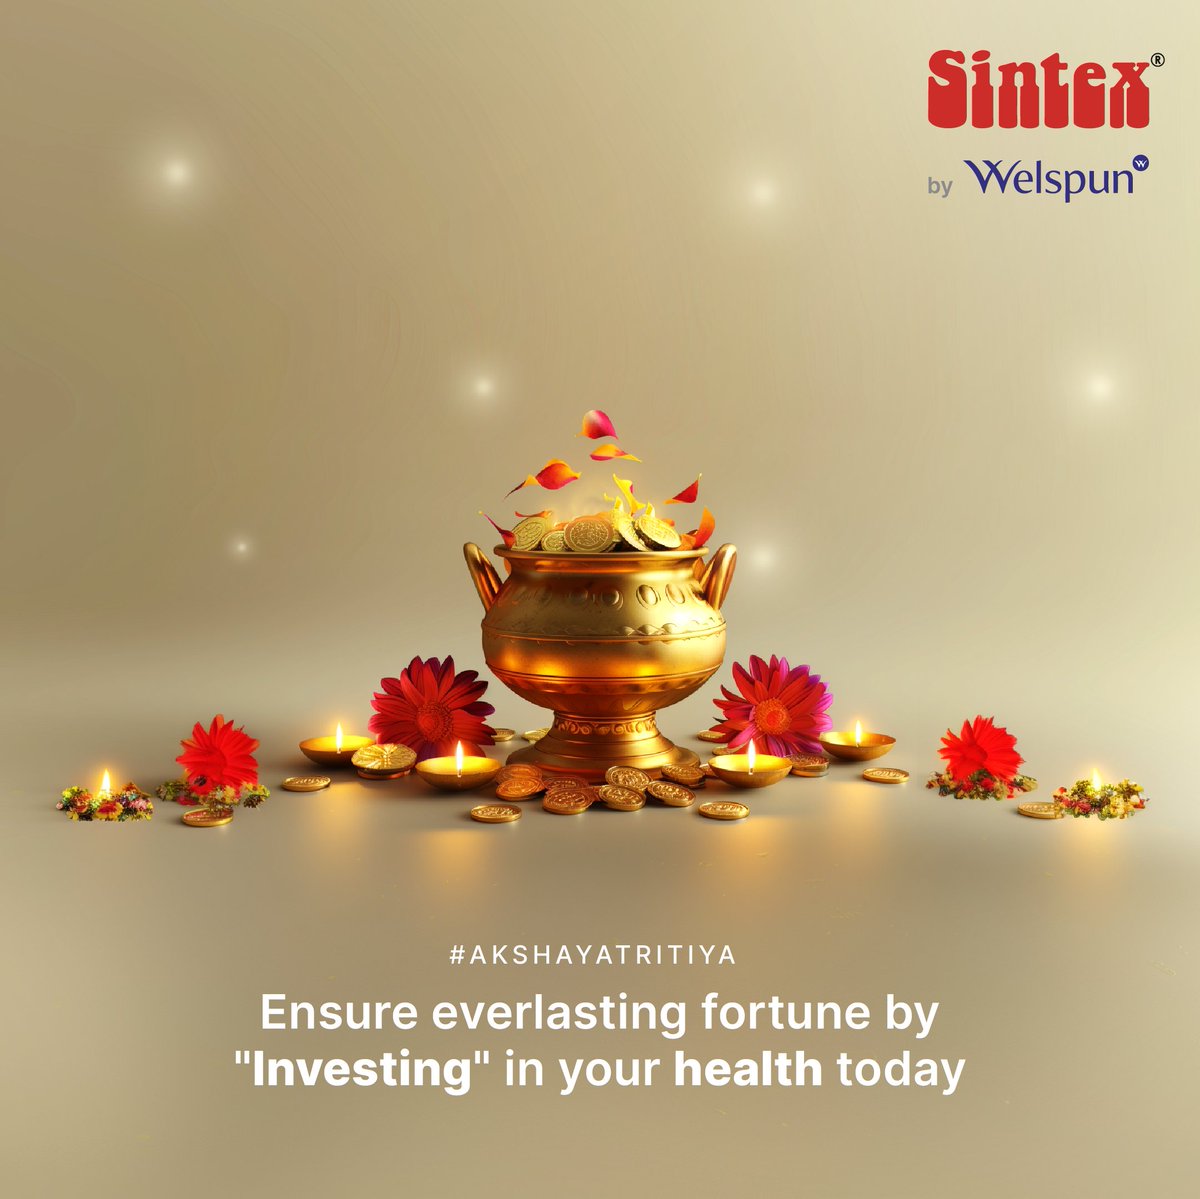 As the auspicious day of Akshaya Tritiya dawns upon us, let us embark on a journey filled with hope, prosperity, and of course good health. #Sintex #Welspun #SintexPure #DeshKiTanki #WaterTanks #SintexbyWelspun #WelspunGroup #AkshayaTritiya #Prosperity